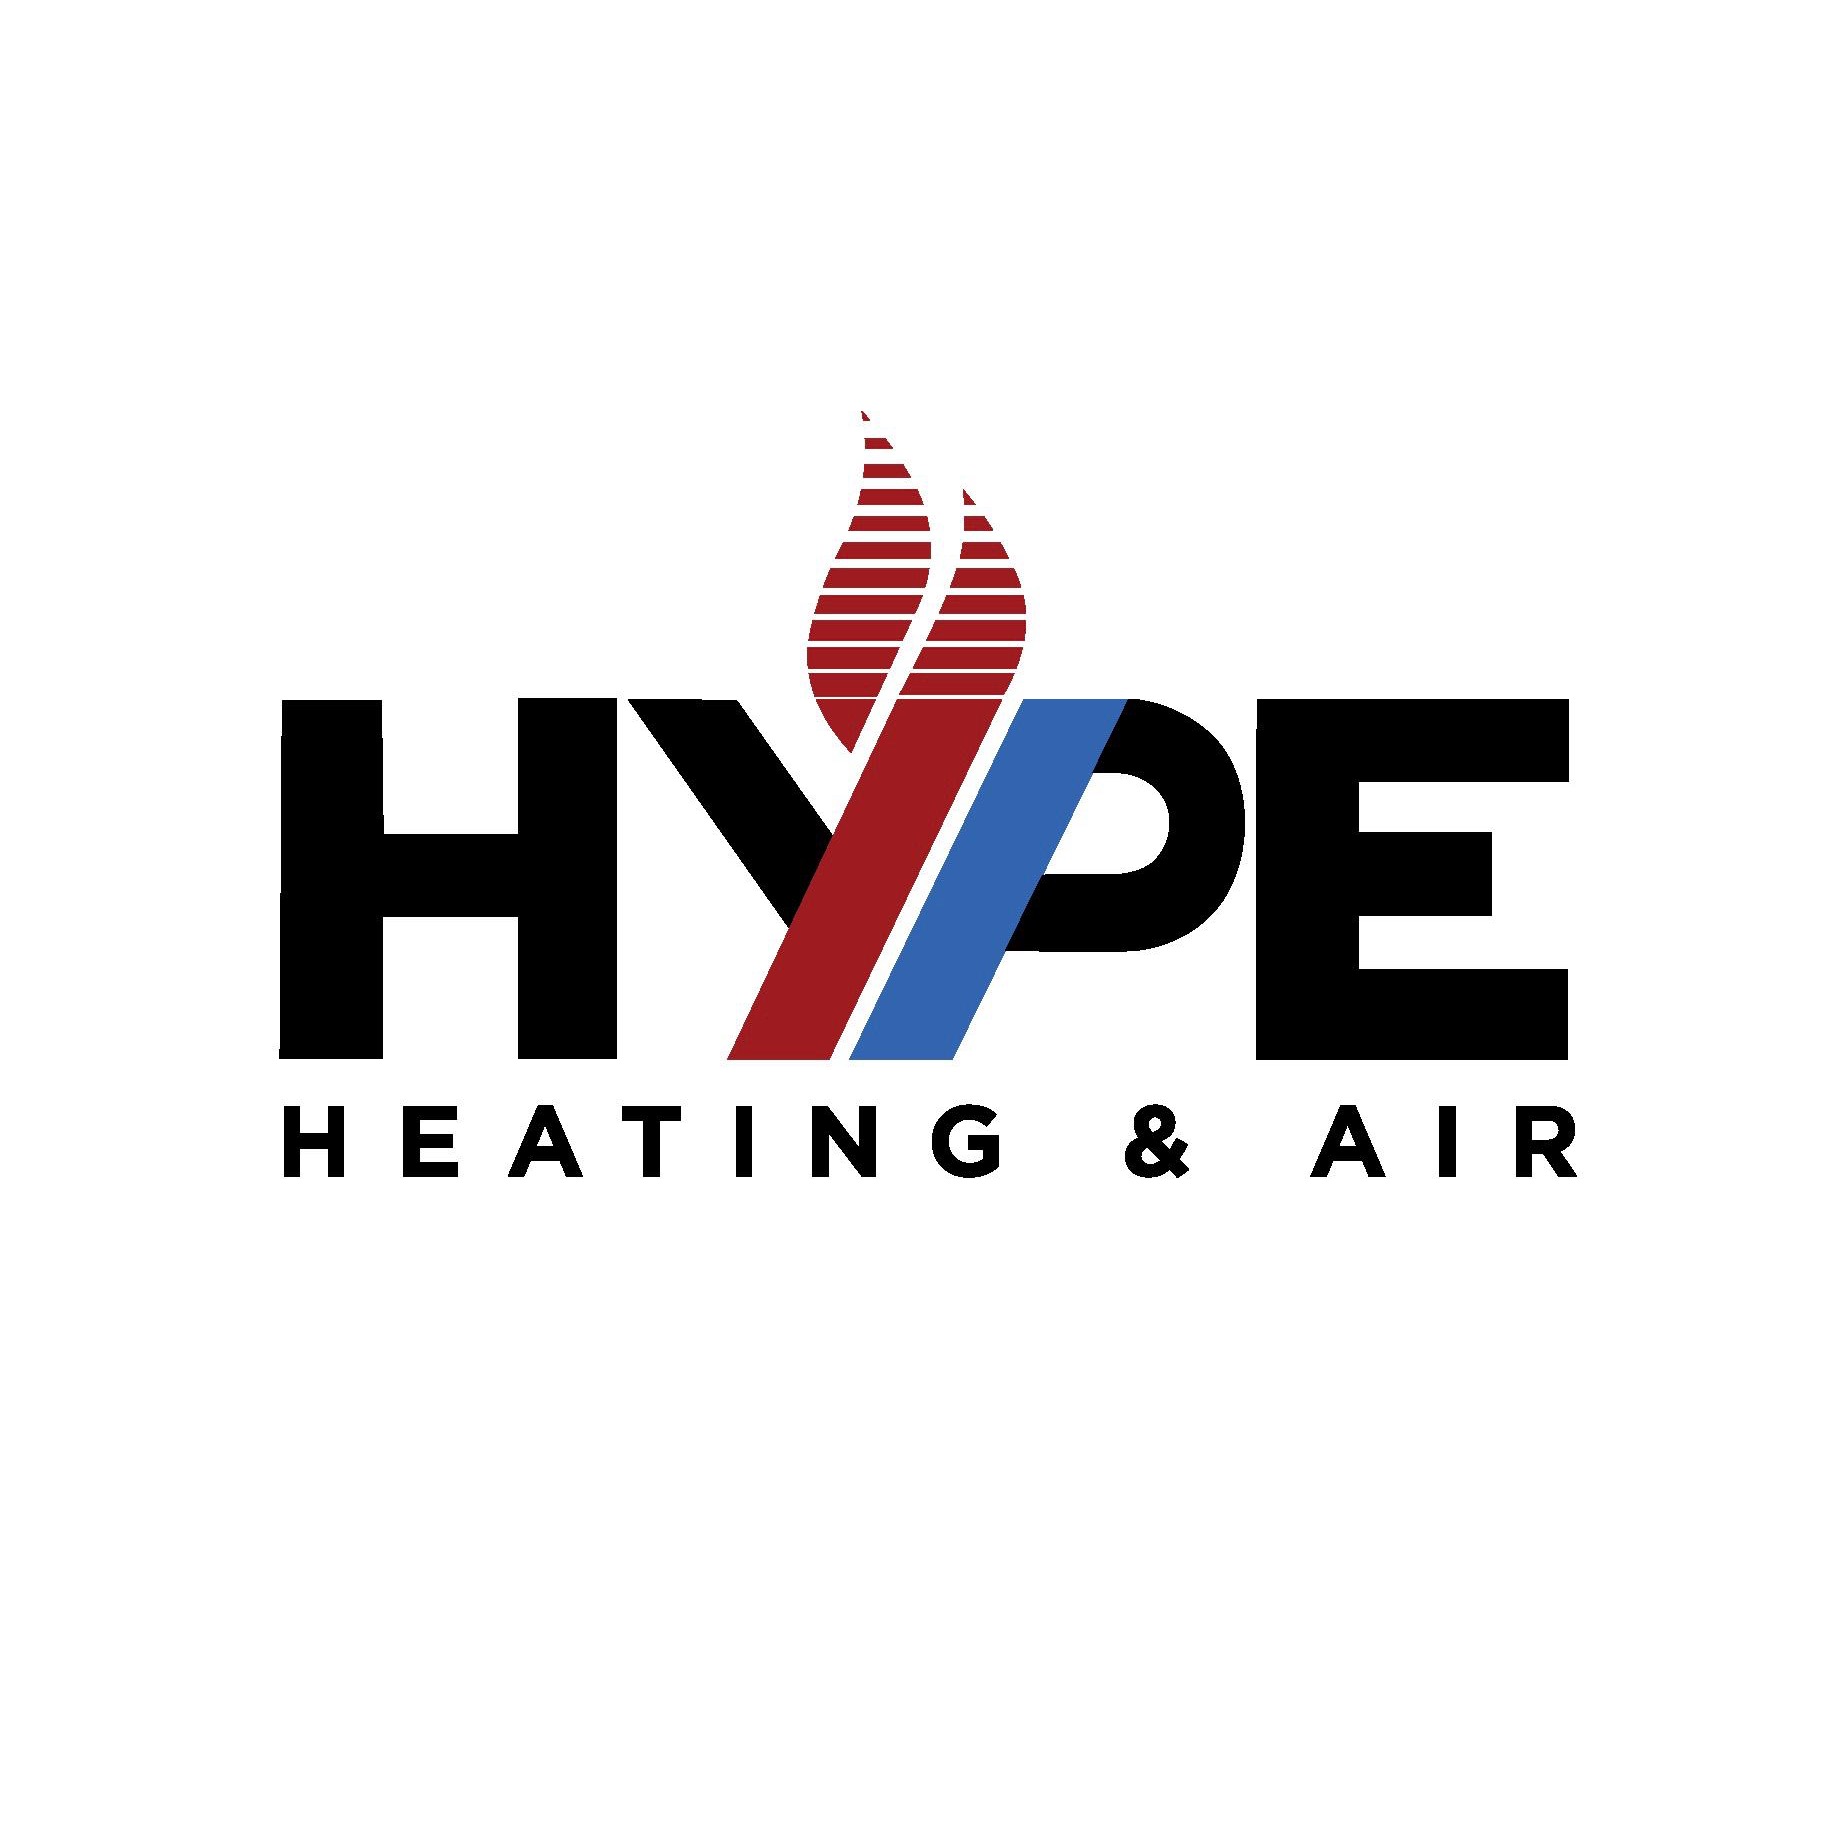 HYPE Heating & Air Conditioning